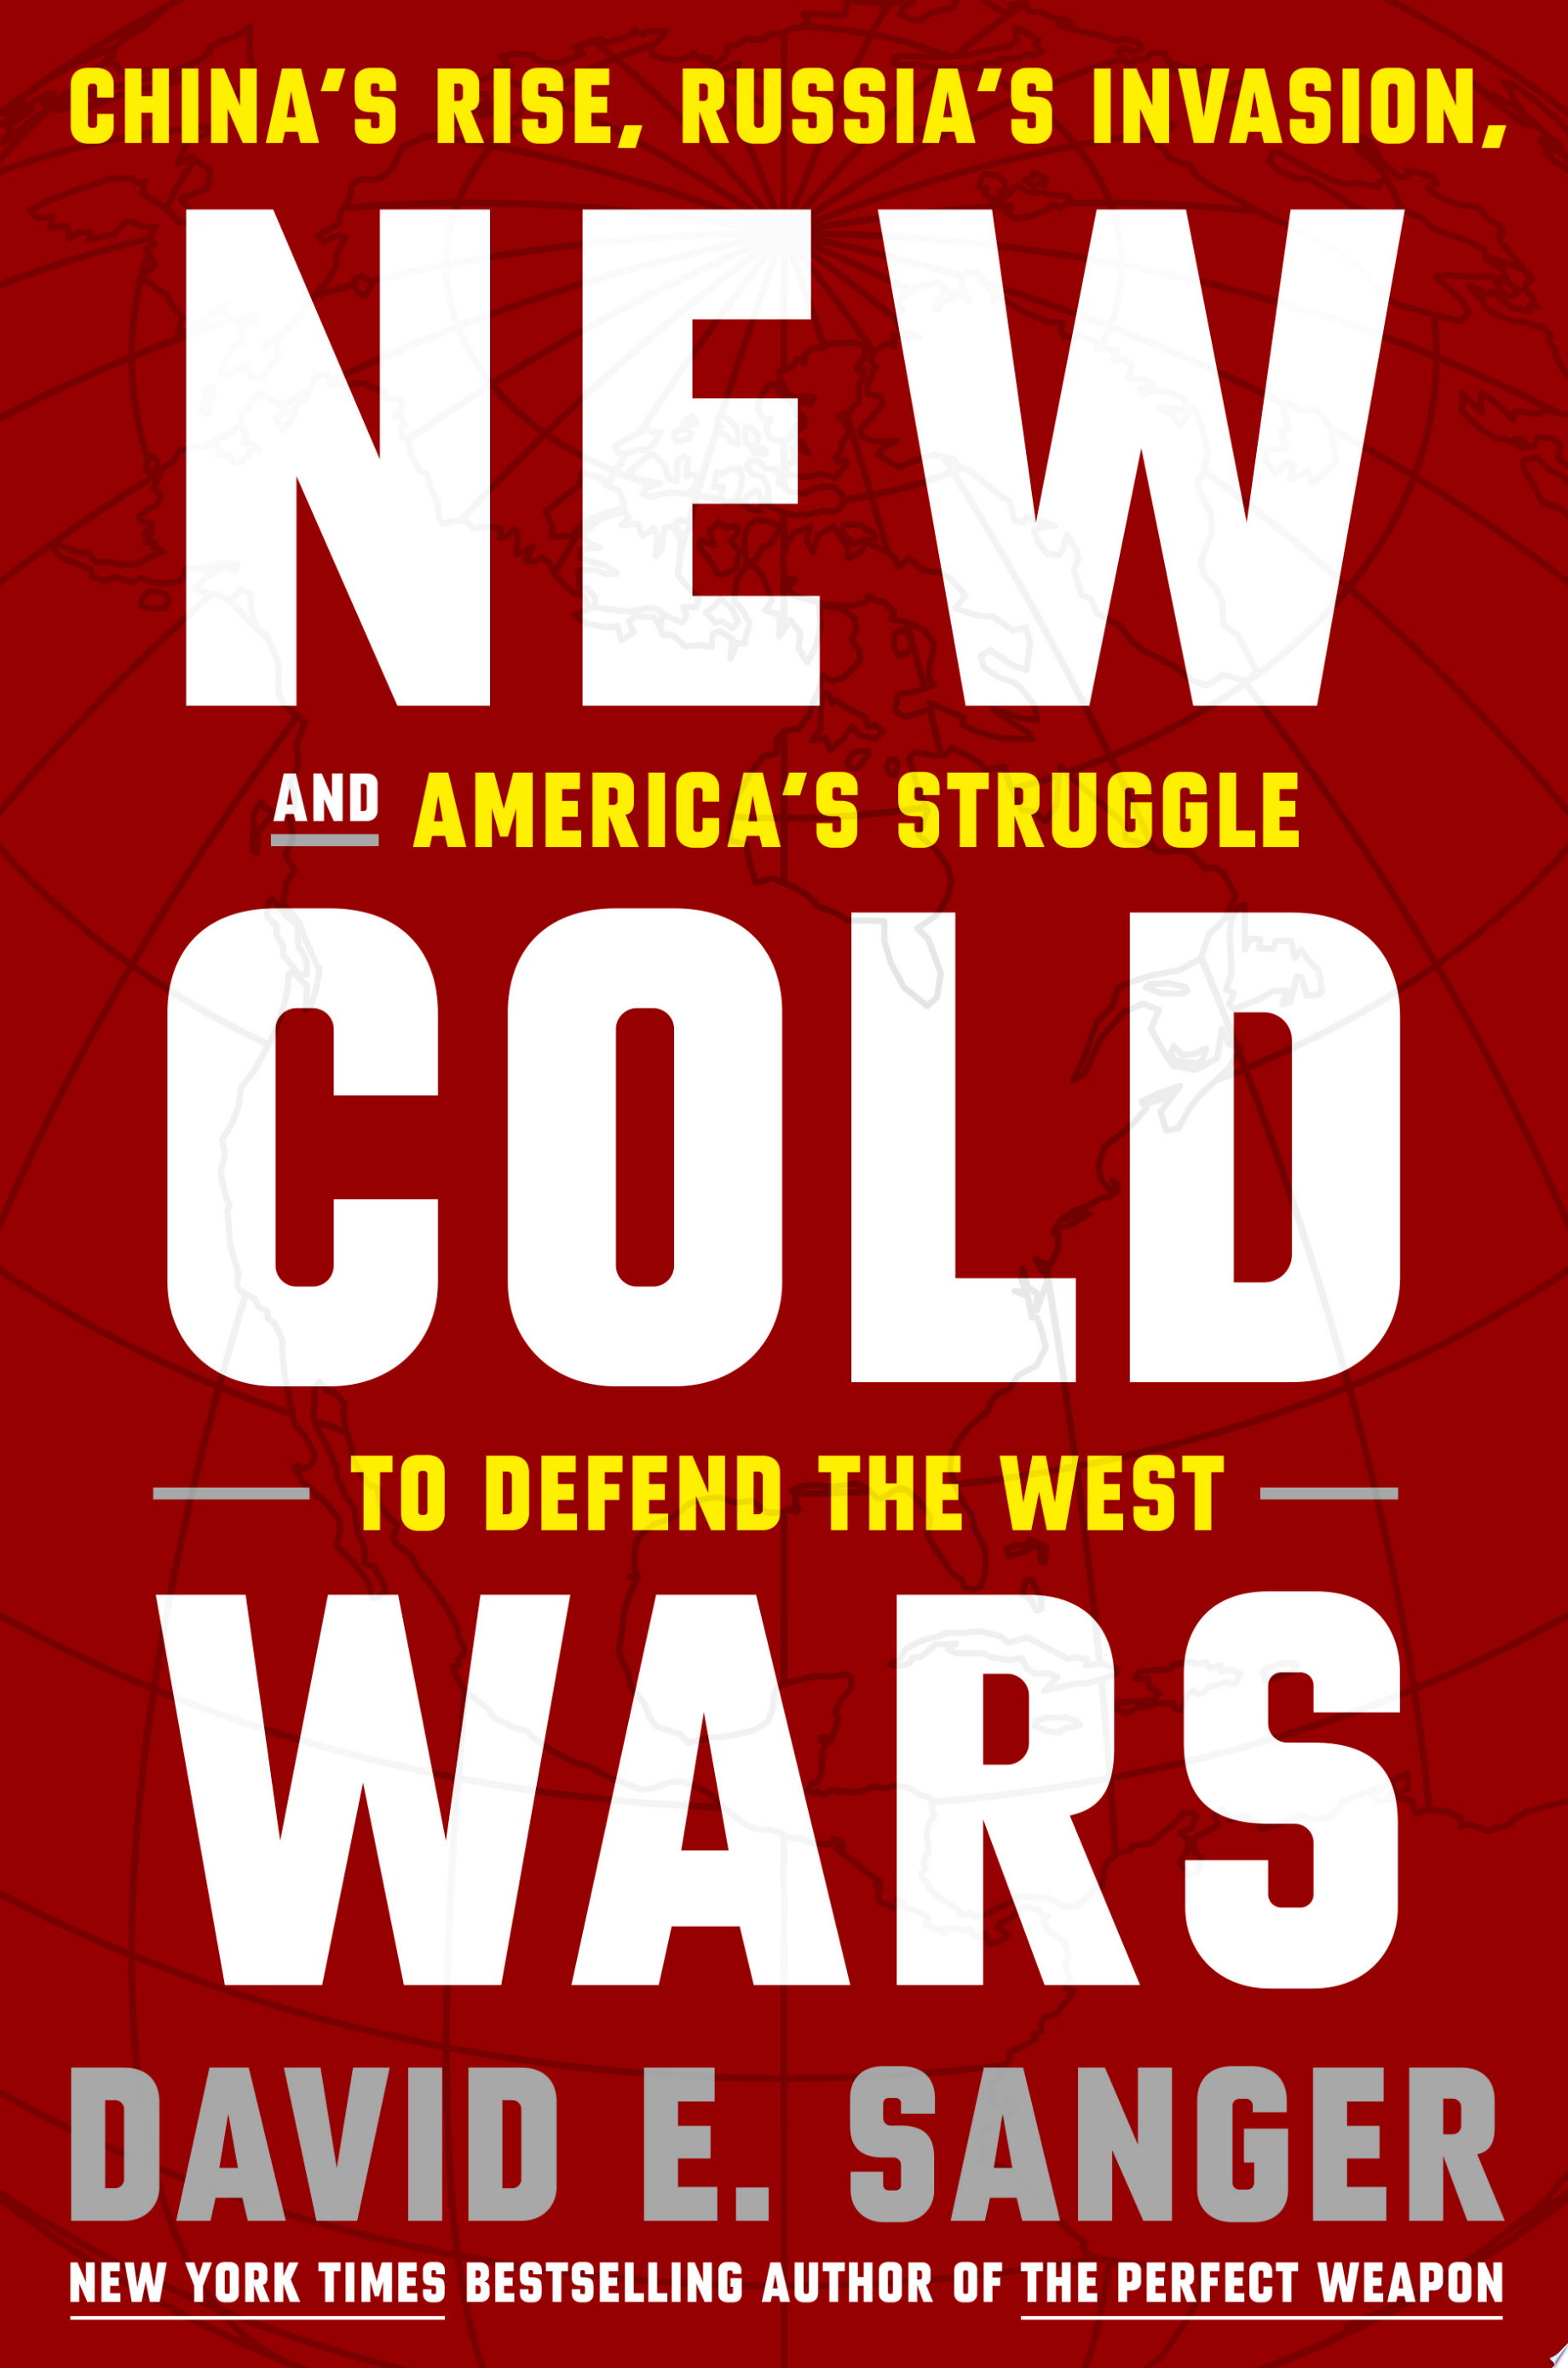 Image for "New Cold Wars"